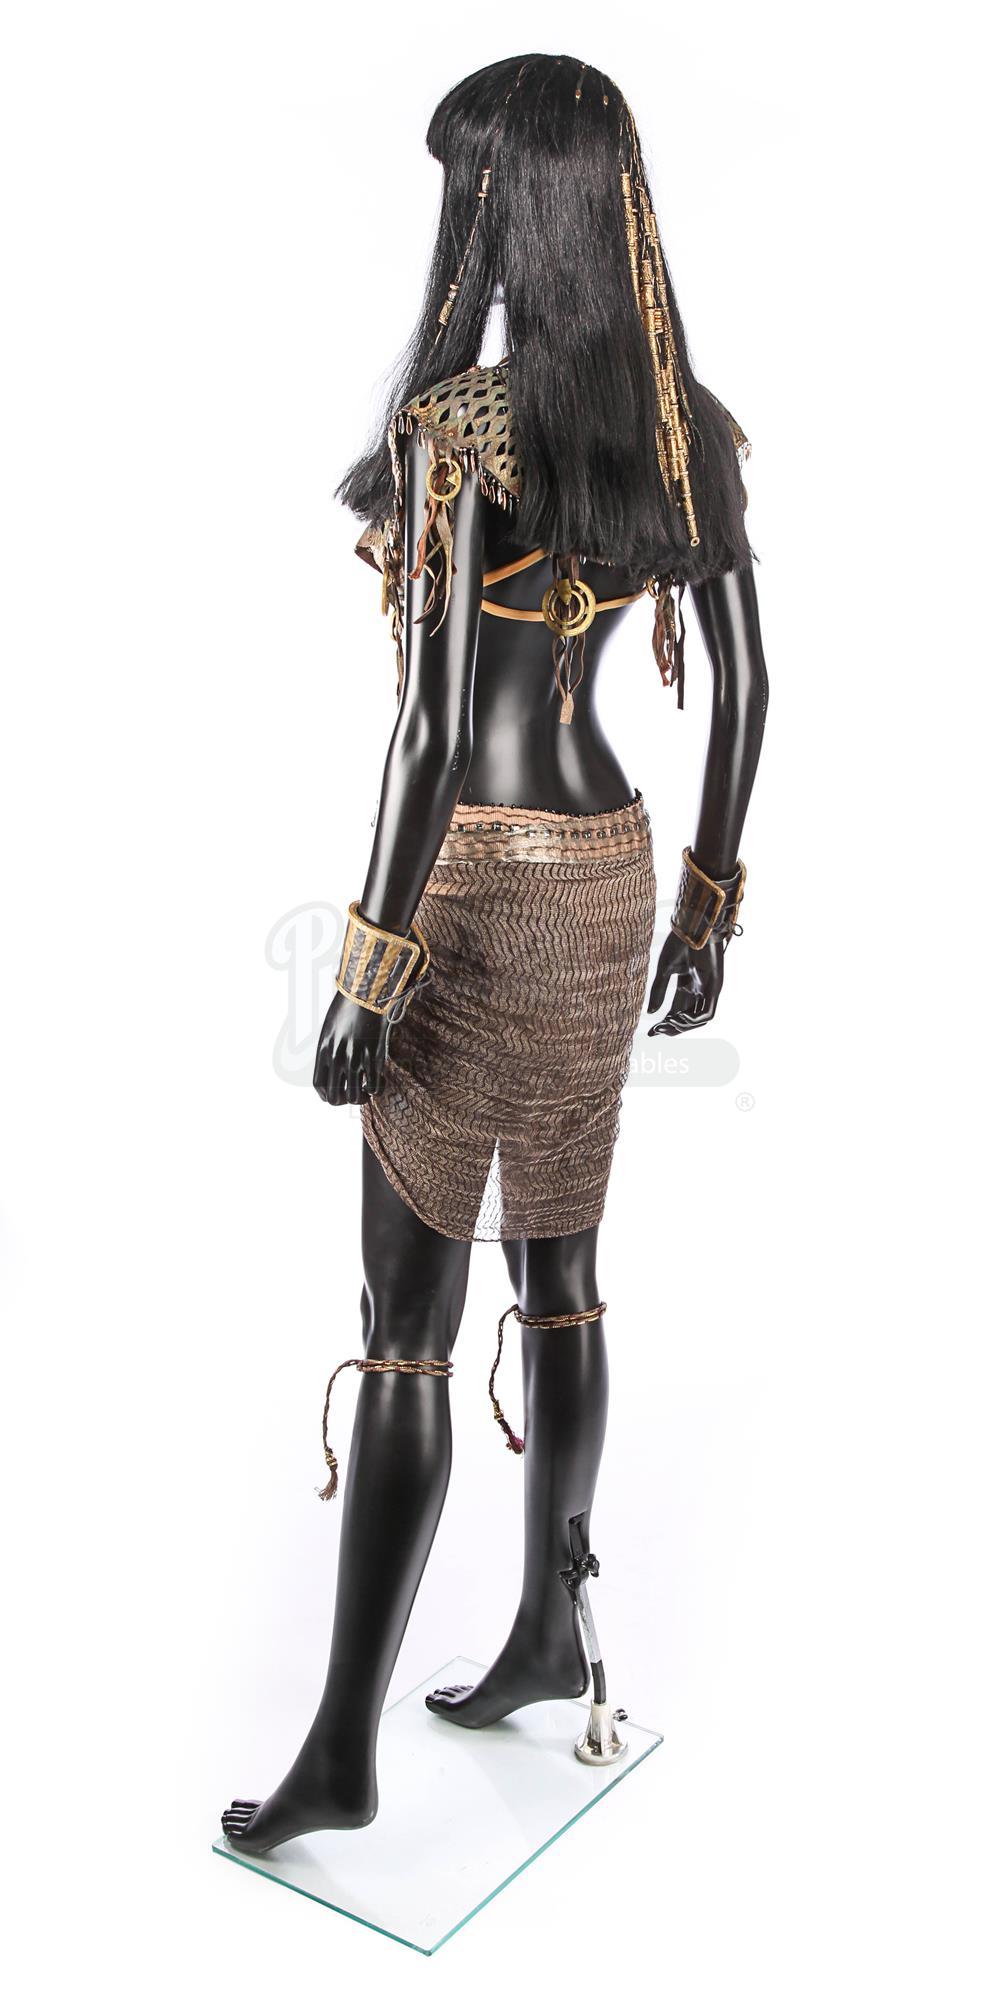 The Mummy: Anck Su Namun - COMPLETED! | RPF Costume and Prop Maker Community